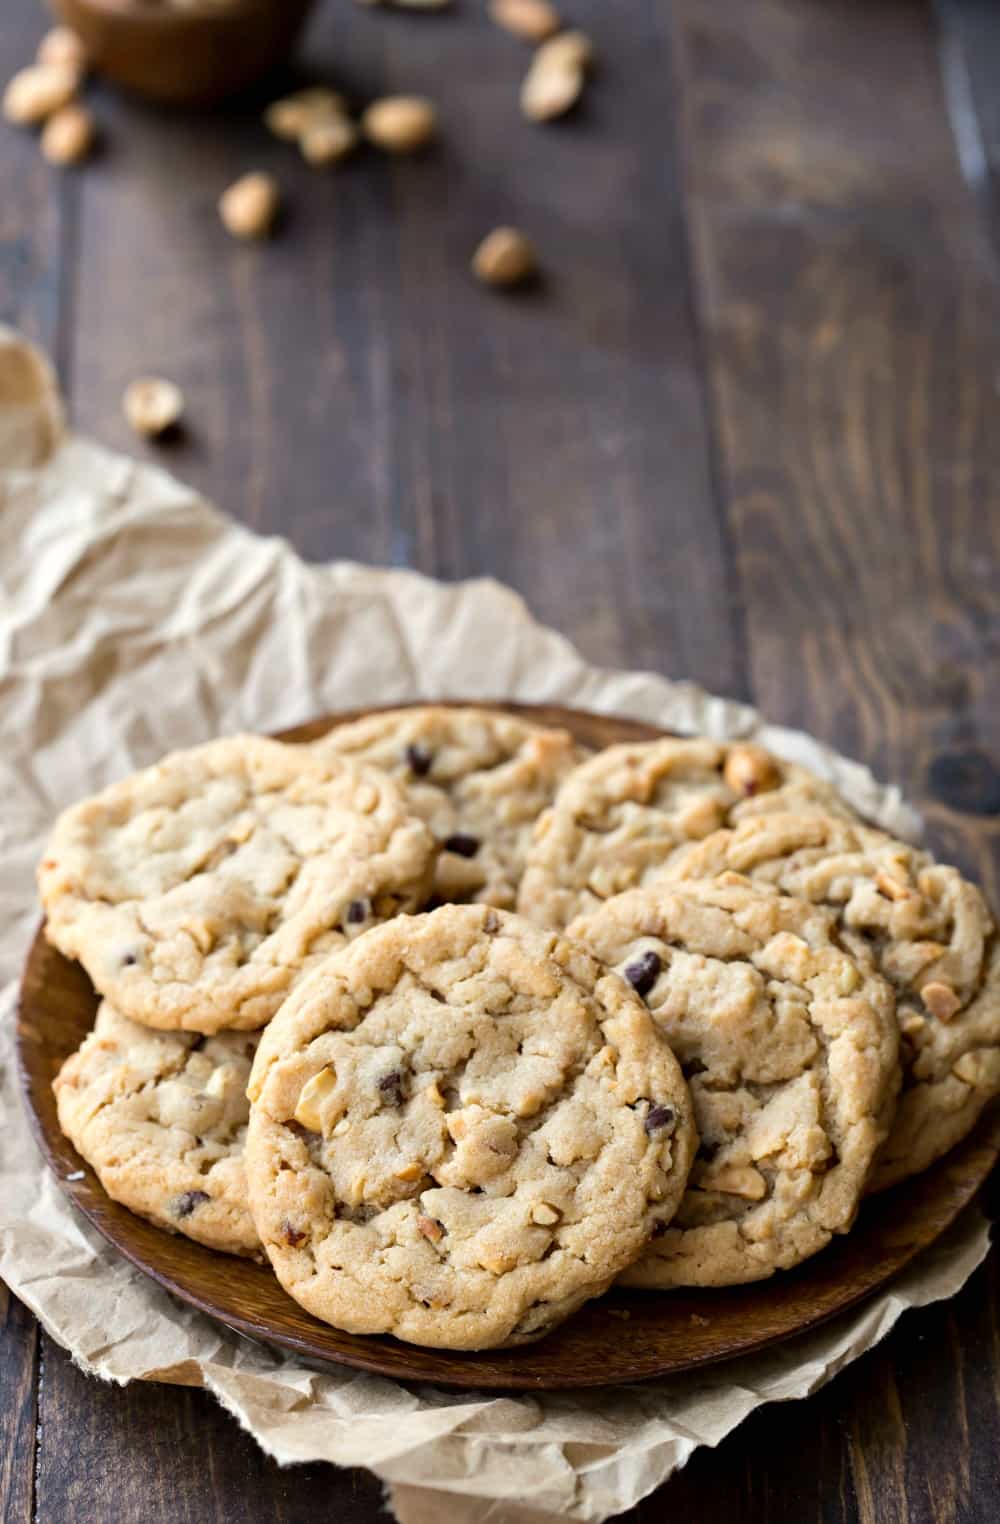 Peanut Butter Chocolate Chip Cookies on a wooden plate next to scattered peanuts